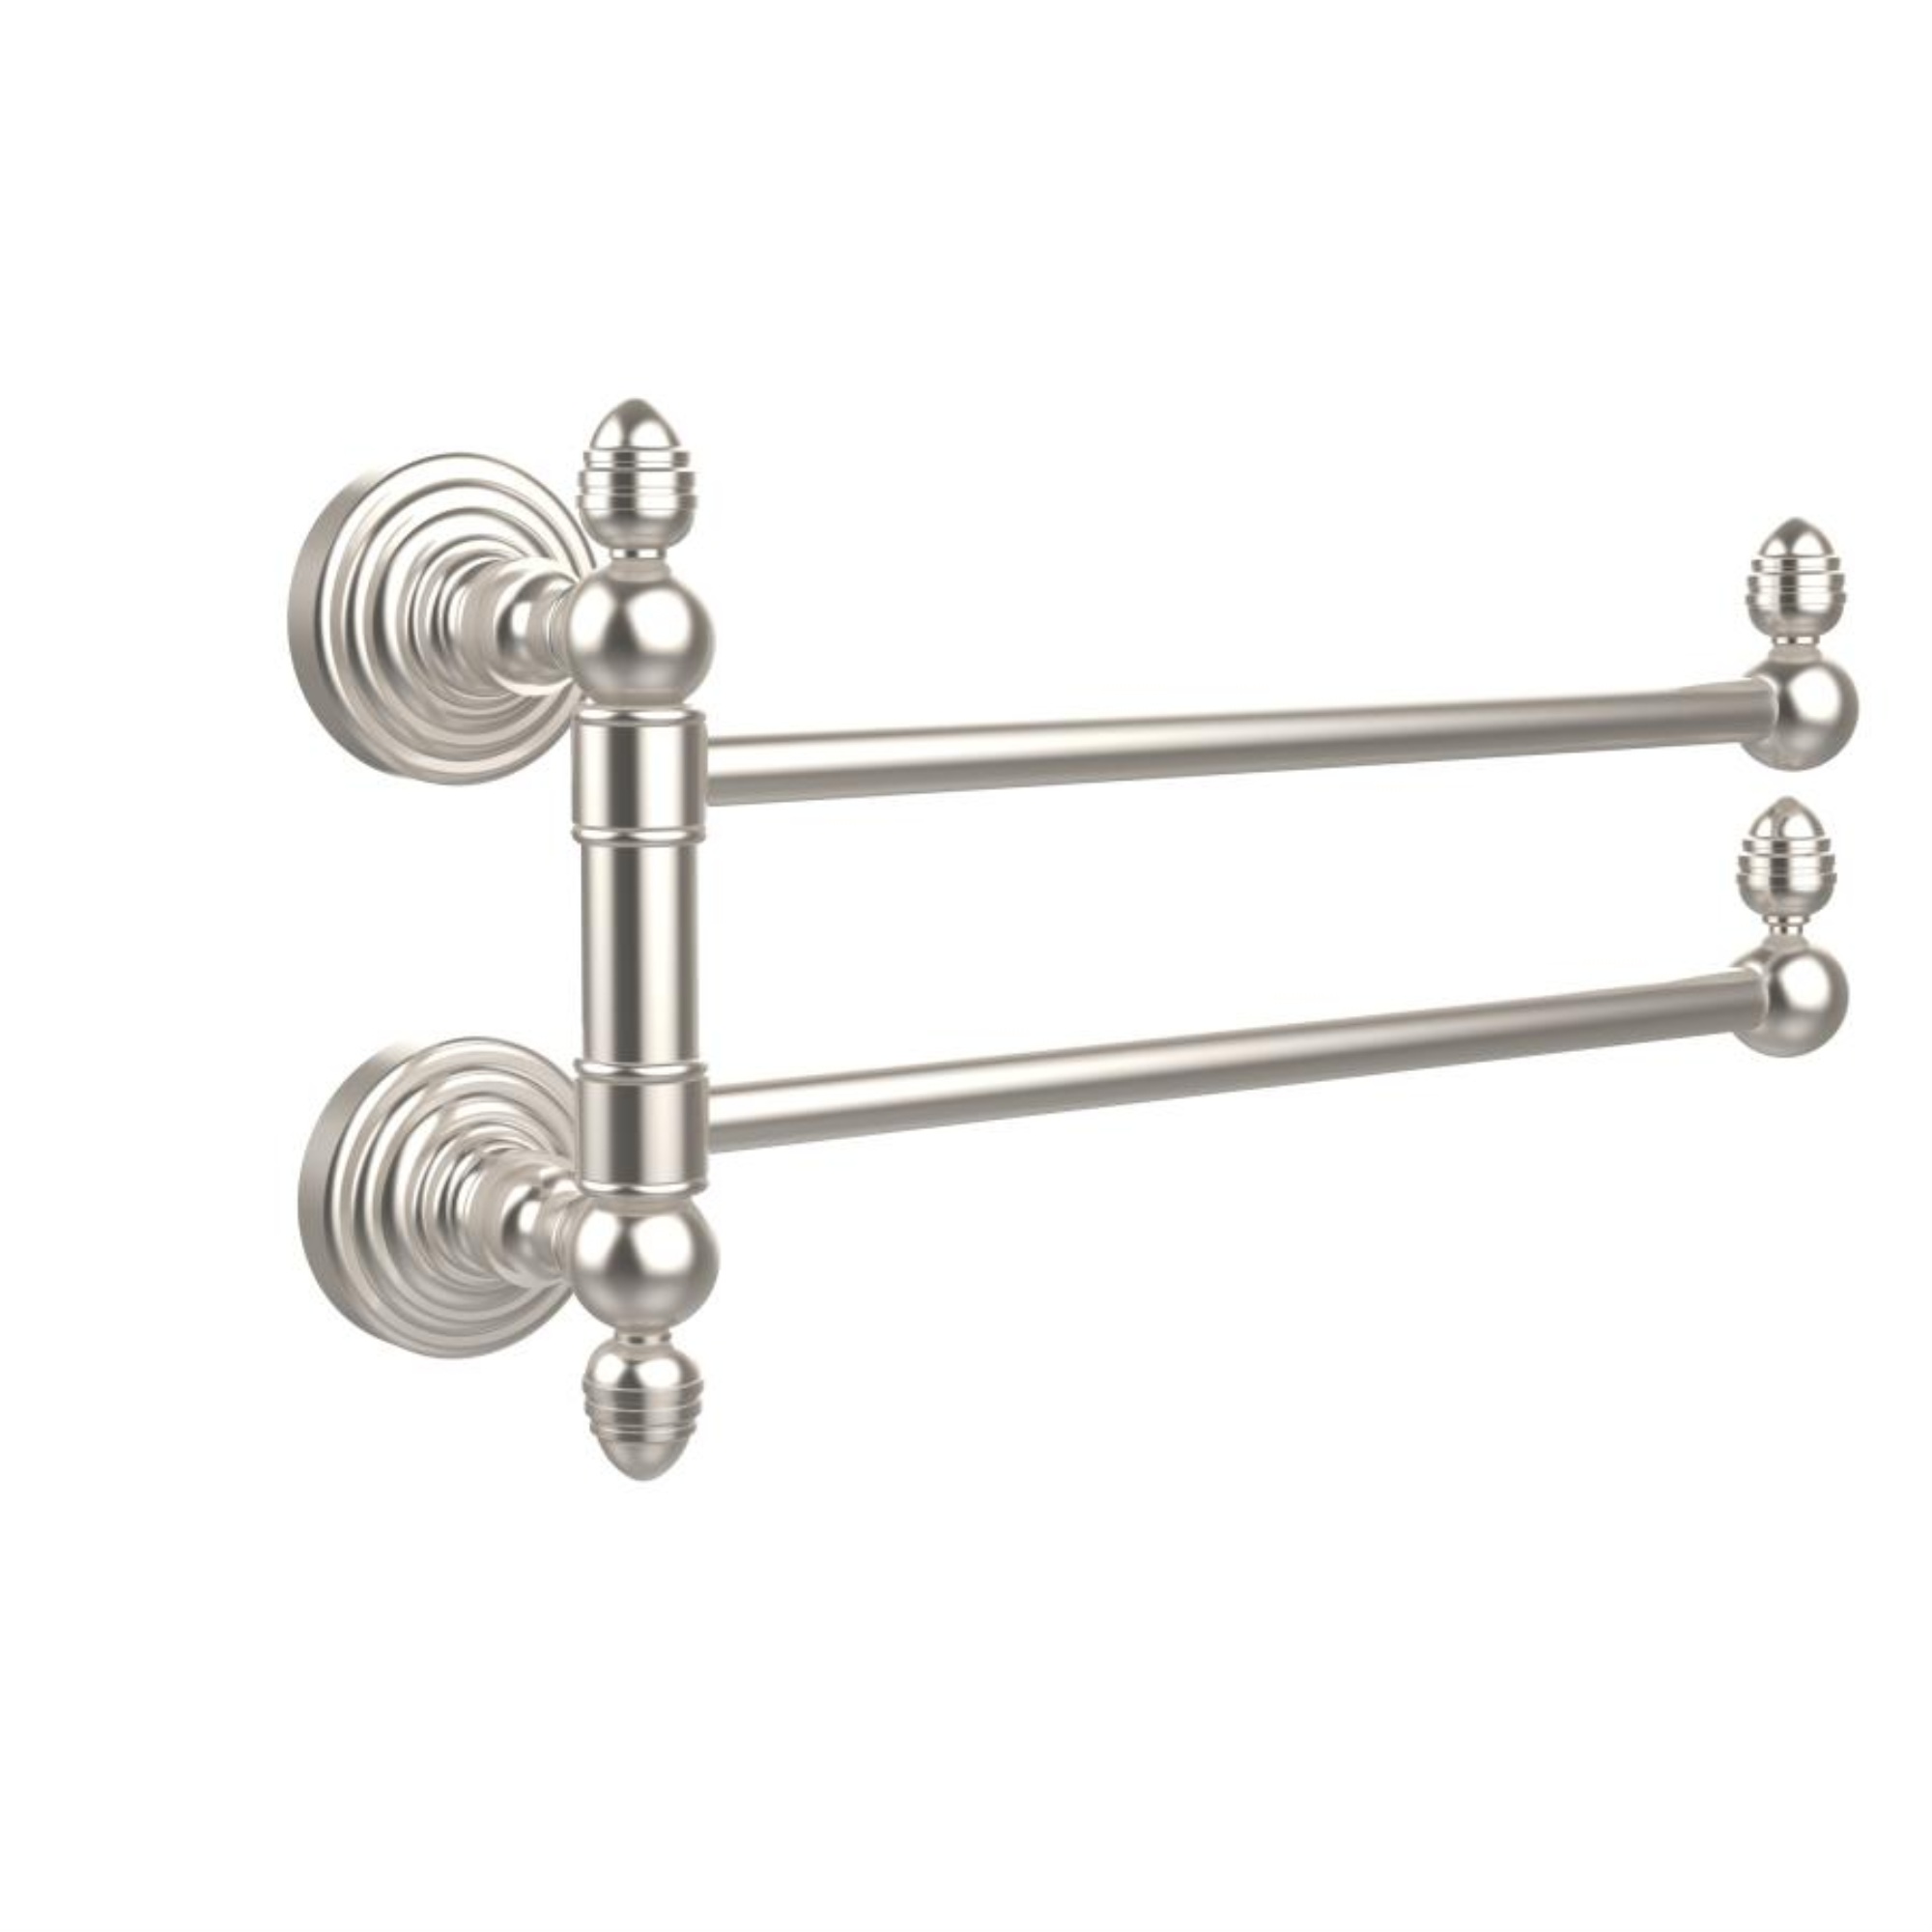 Allied Brass Waverly Place Collection 2 Swing Arm Towel Rail - WP-GTB-2-SN